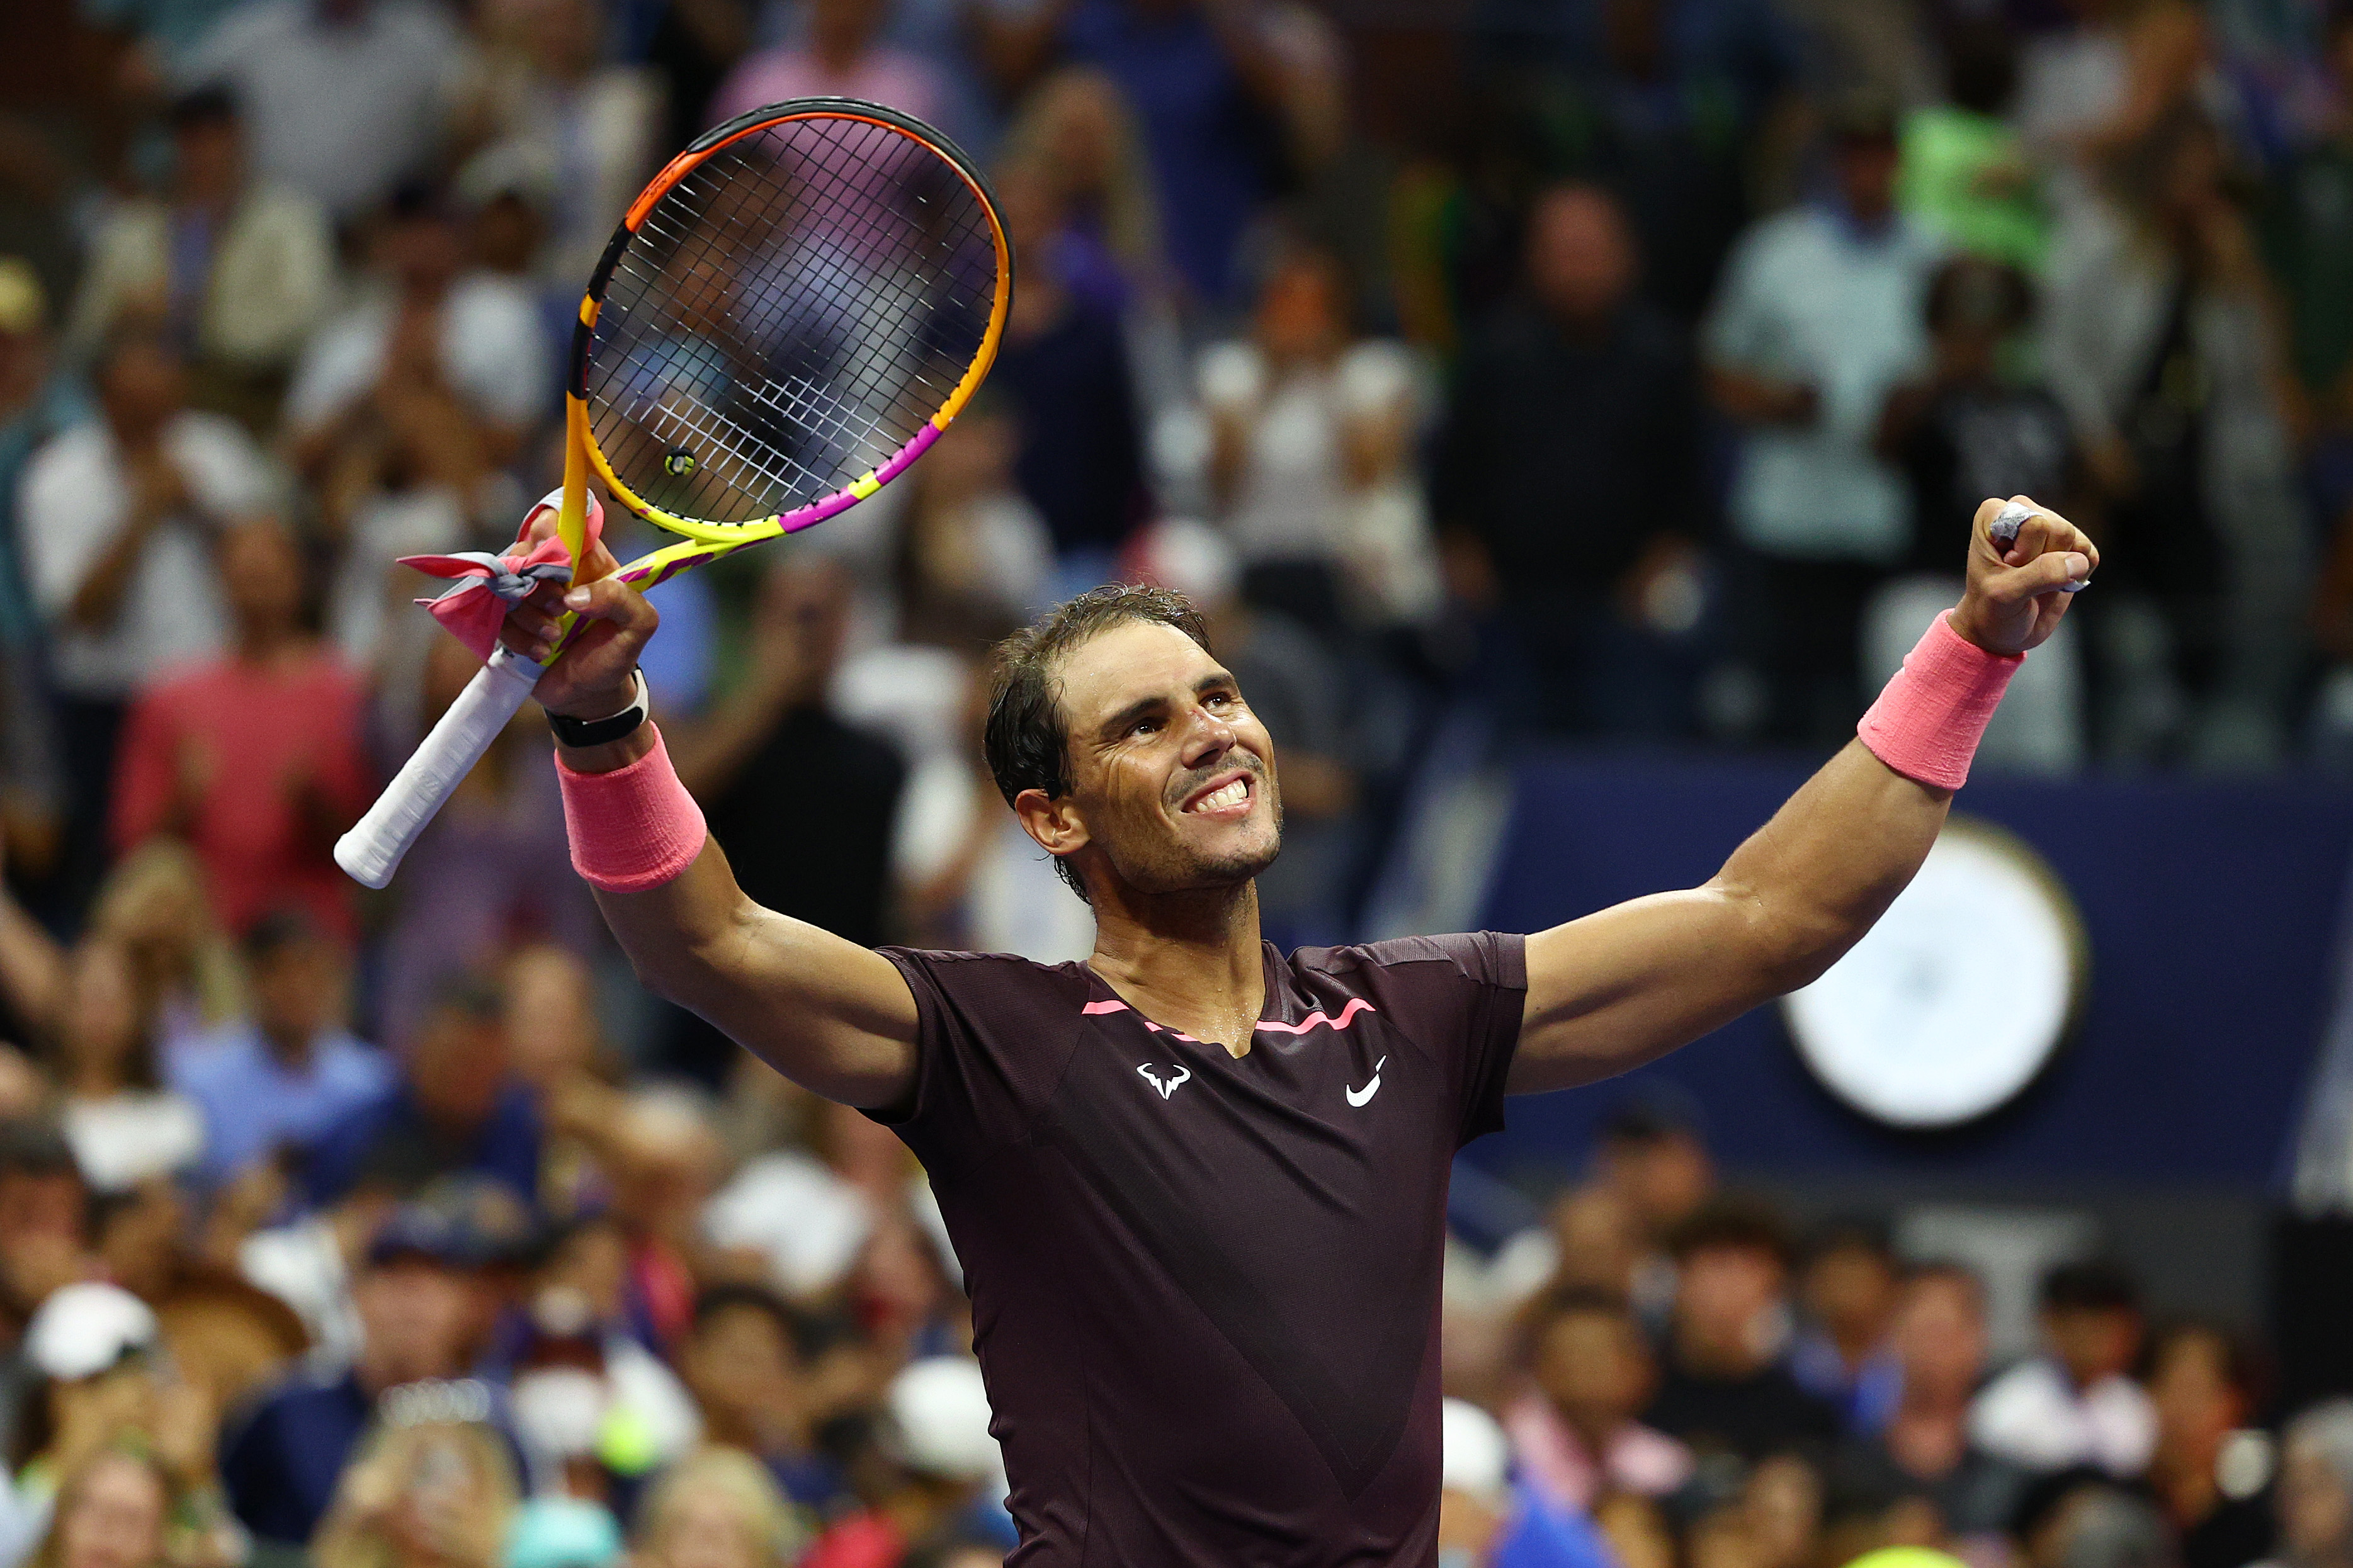 Rafael Nadal of Spain celebrates a win against Richard Gasquet of France during their Men's Singles Third Round match on Day Six of the 2022 US Open at USTA Billie Jean King National Tennis Center on September 03, 2022 in the Flushing neighborhood of the Queens borough of New York City. (Photo by Elsa/Getty Images)